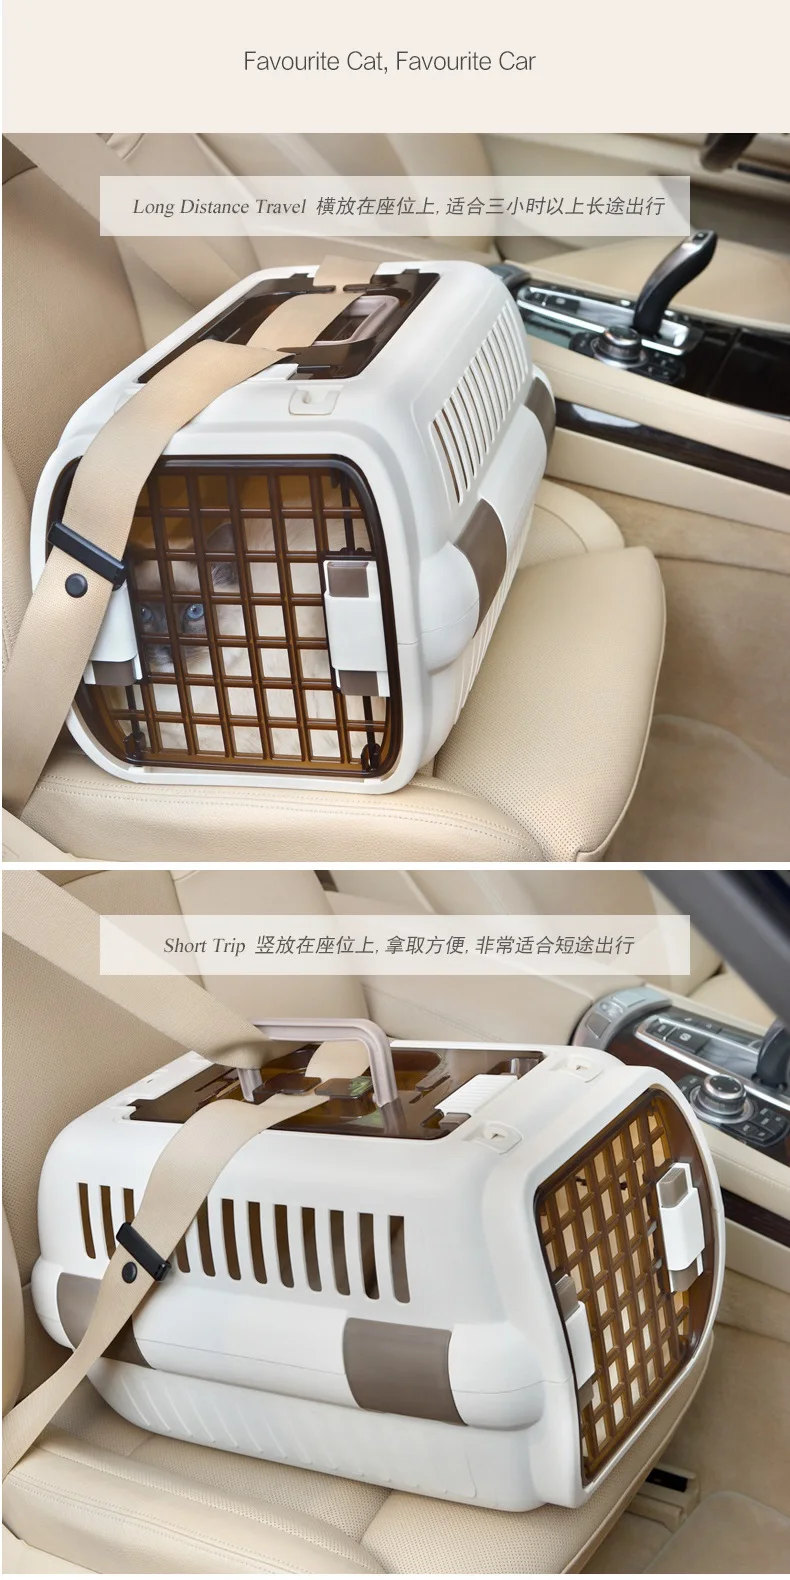 Breathable Portable Pet Travel Carrier Air Transport Cage For Cats Puppies And Small Dogs By Wlyang - 7